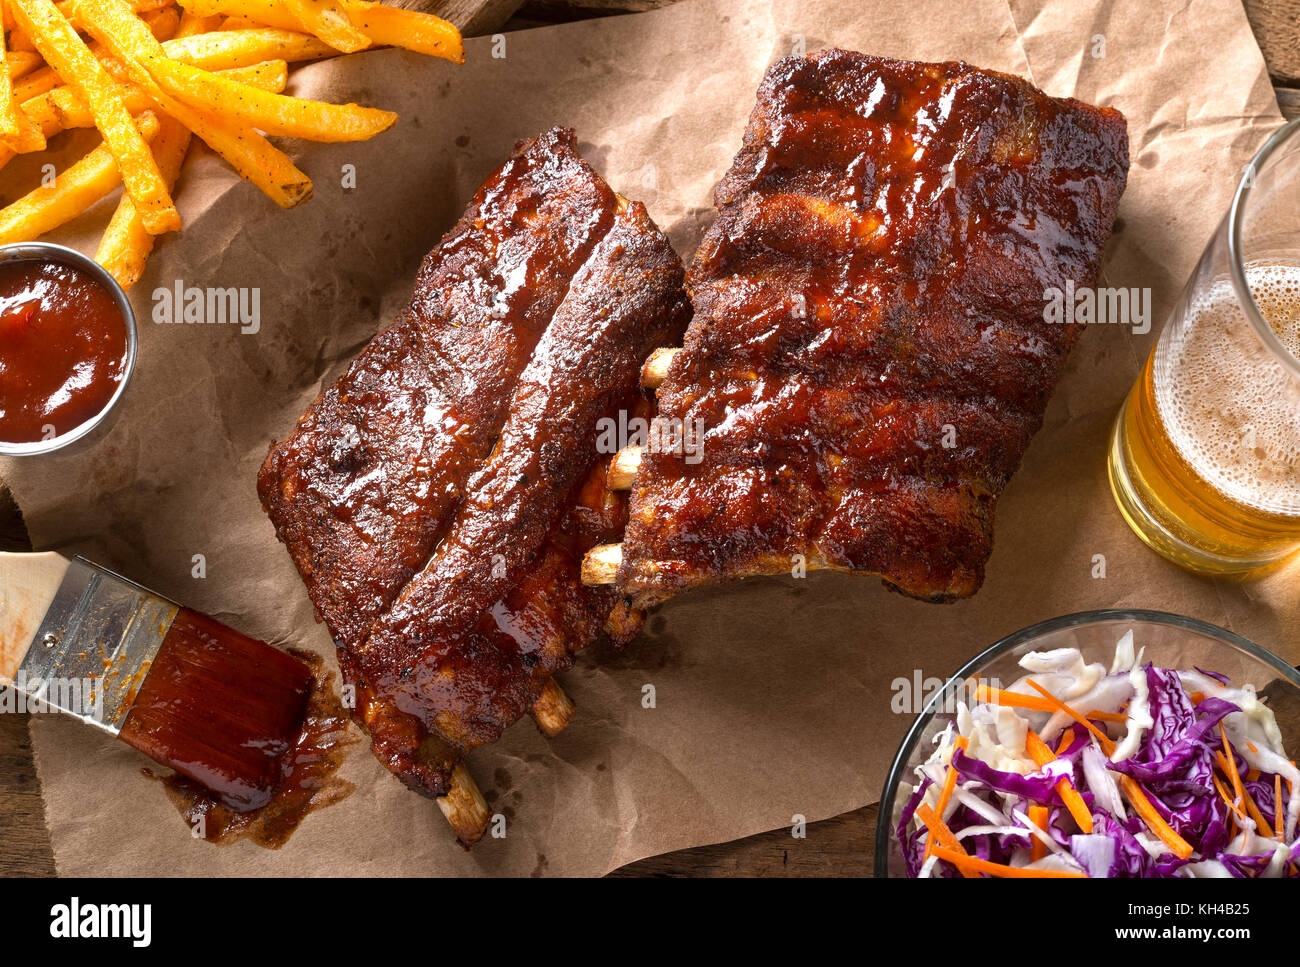 A rack of delicious baby back ribs with barbecue sauce, french fries, coleslaw and beer. Stock Photo